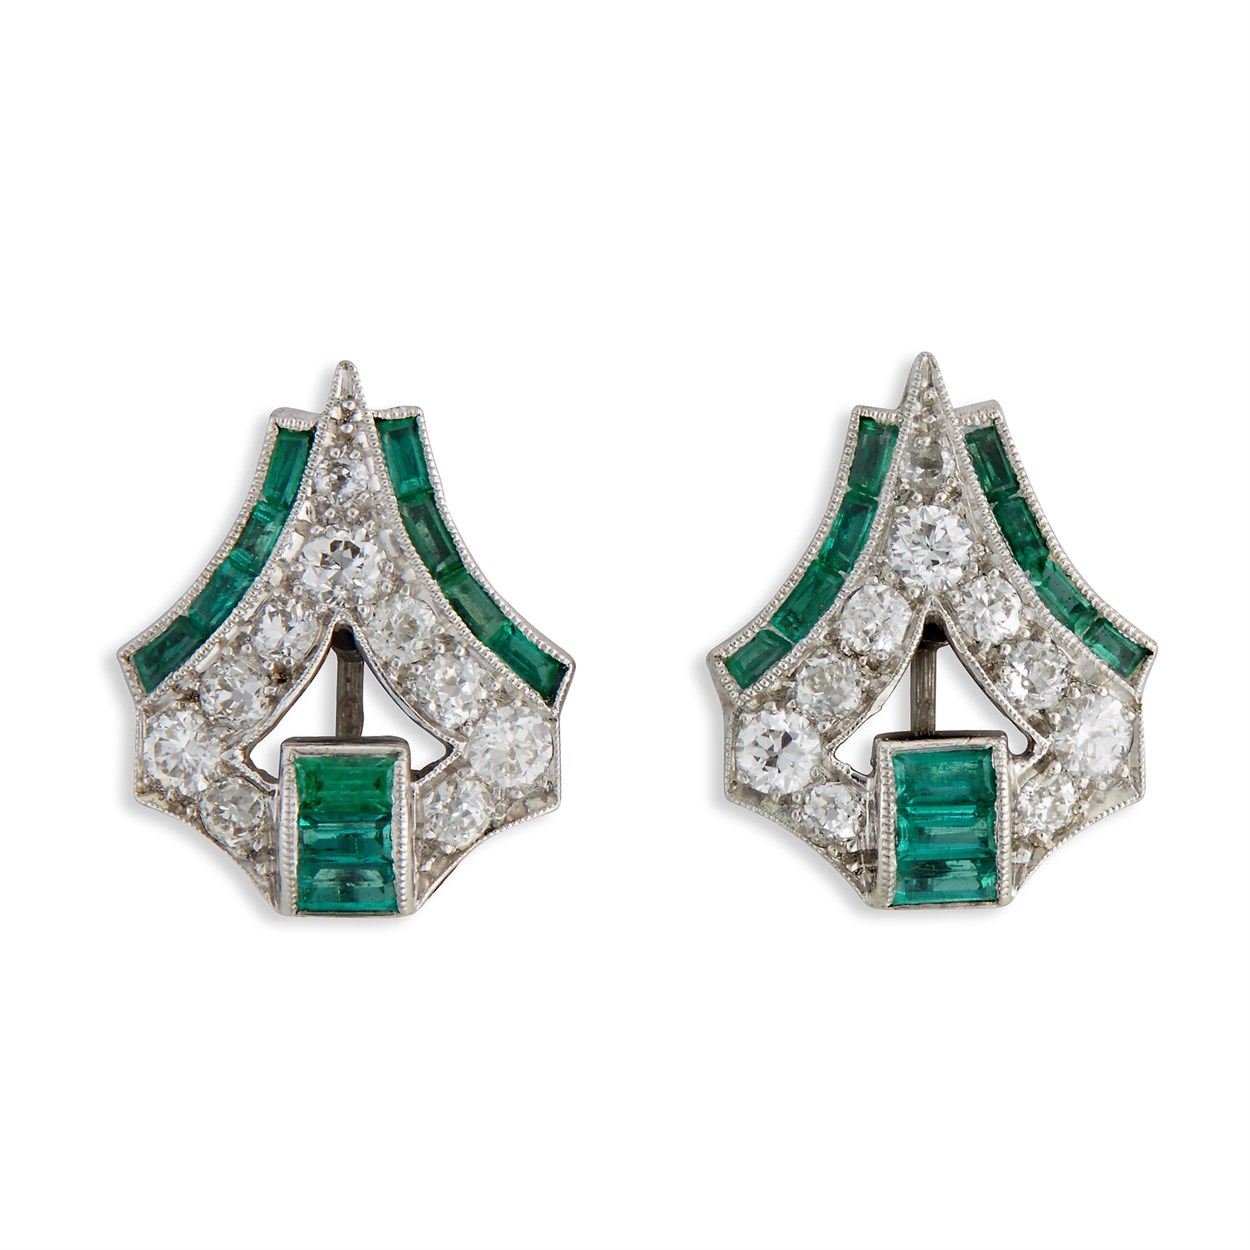 Lot 17 - A pair of emerald, diamond, and platinum ear clips